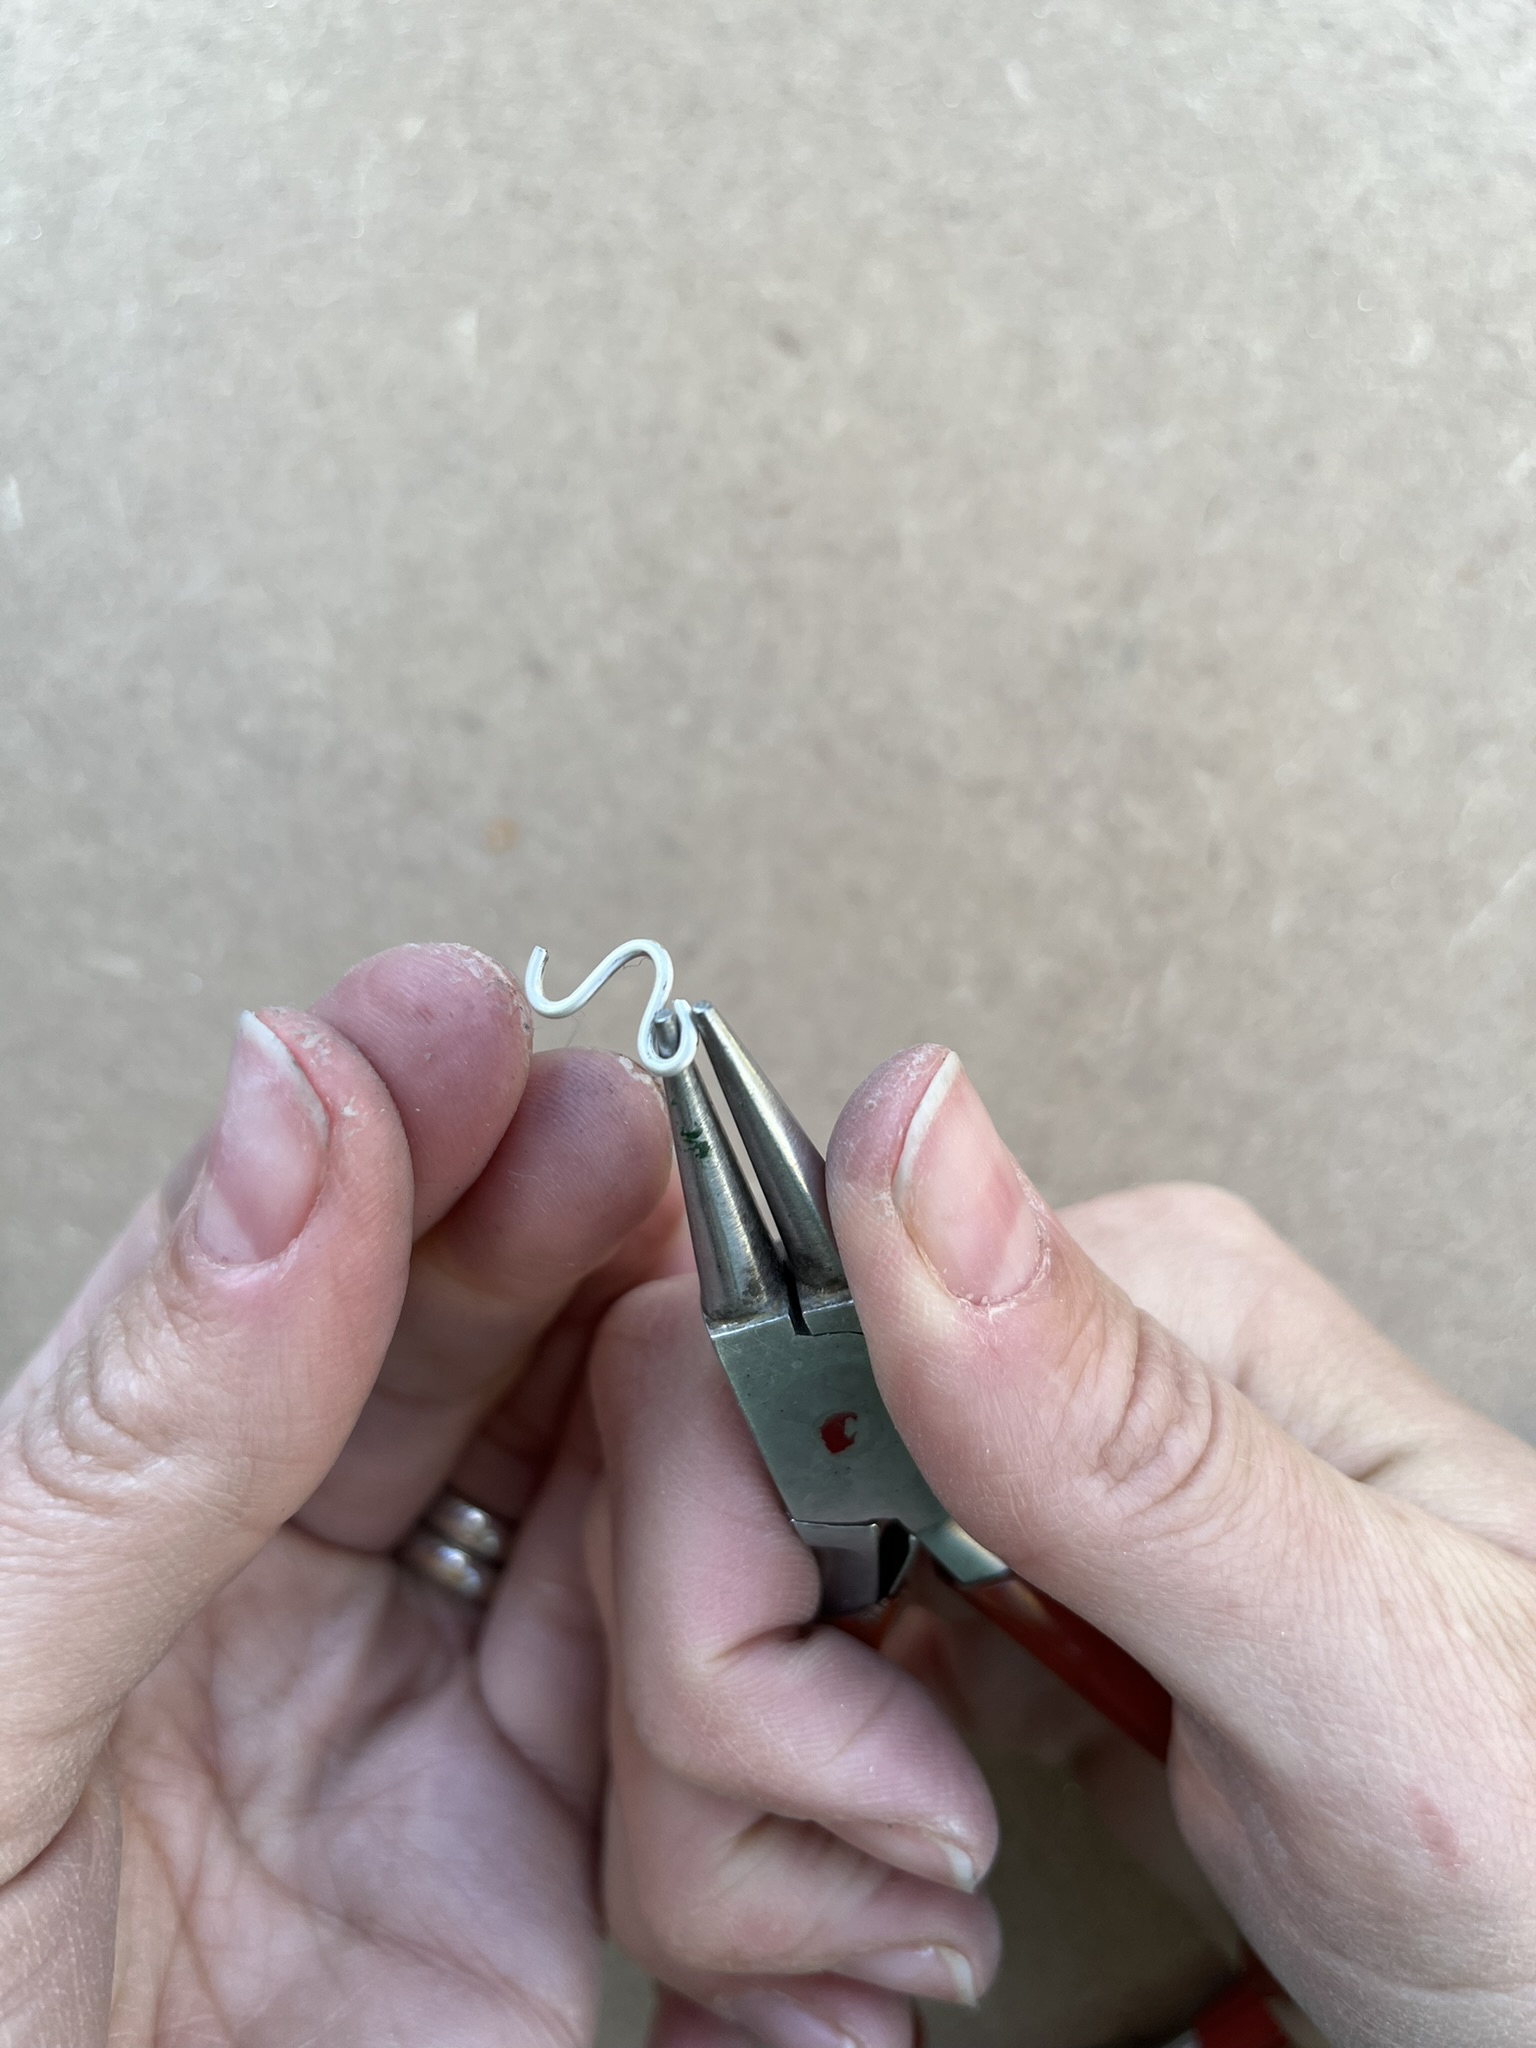 Use round nose pliers to create a loop and bend the wire in the middle. 